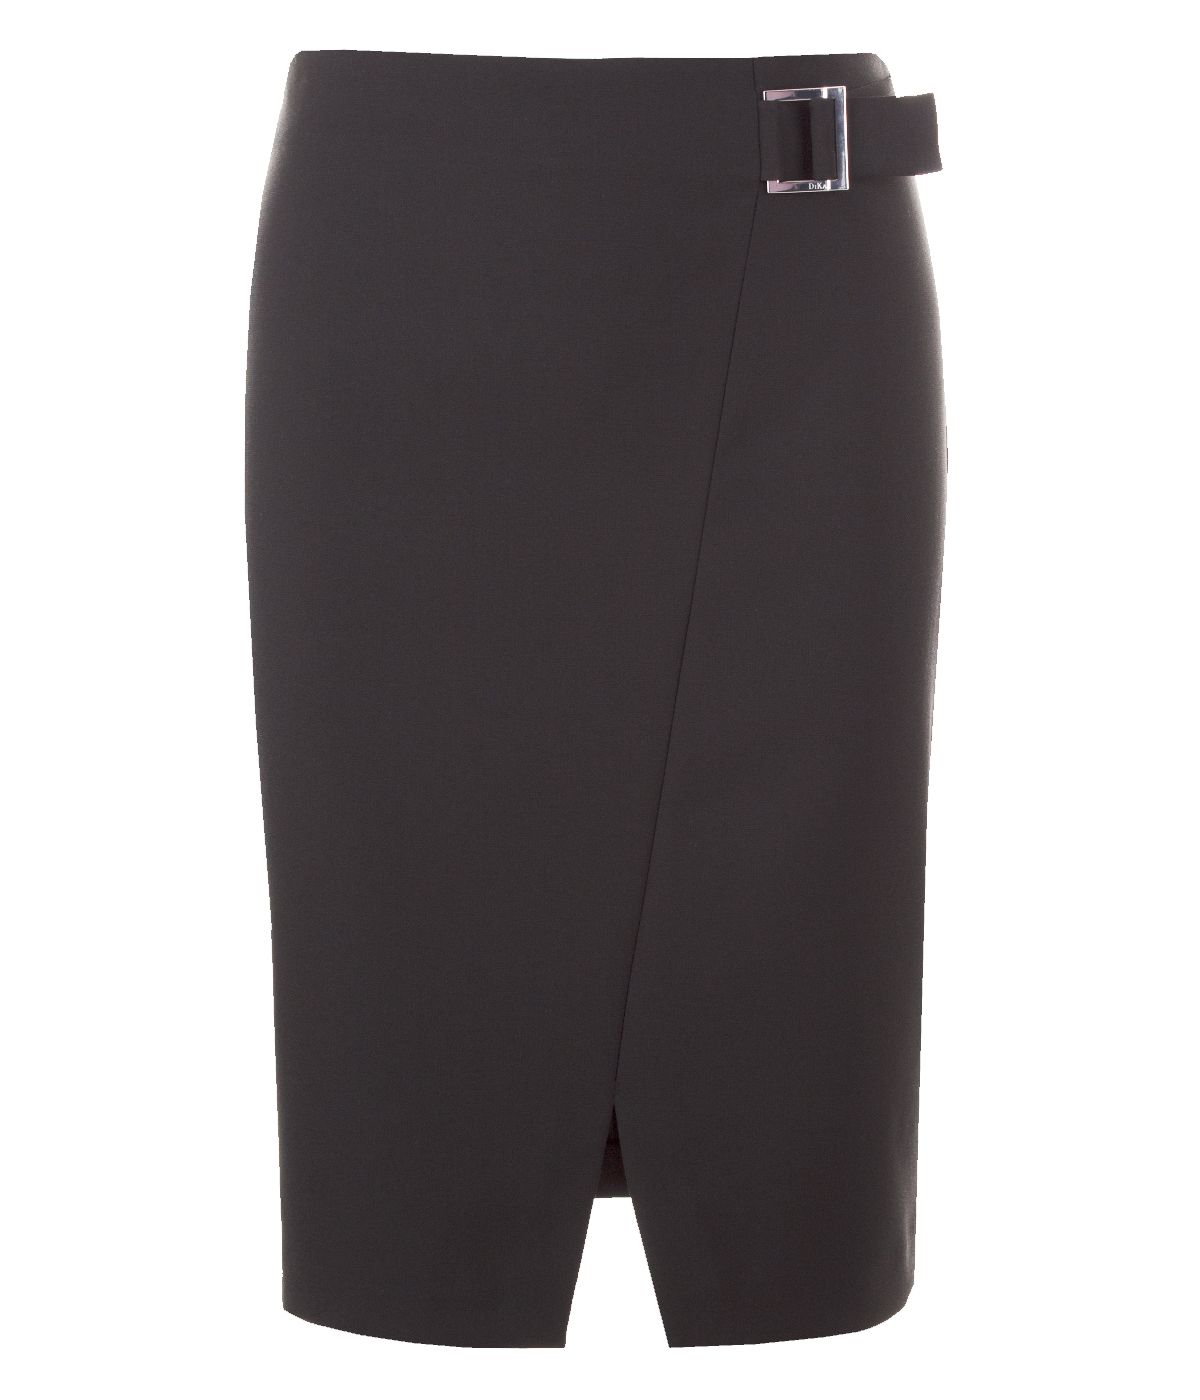 Pencil skirt with front slit, diagonal seam and decorative buckle on the waistline 0